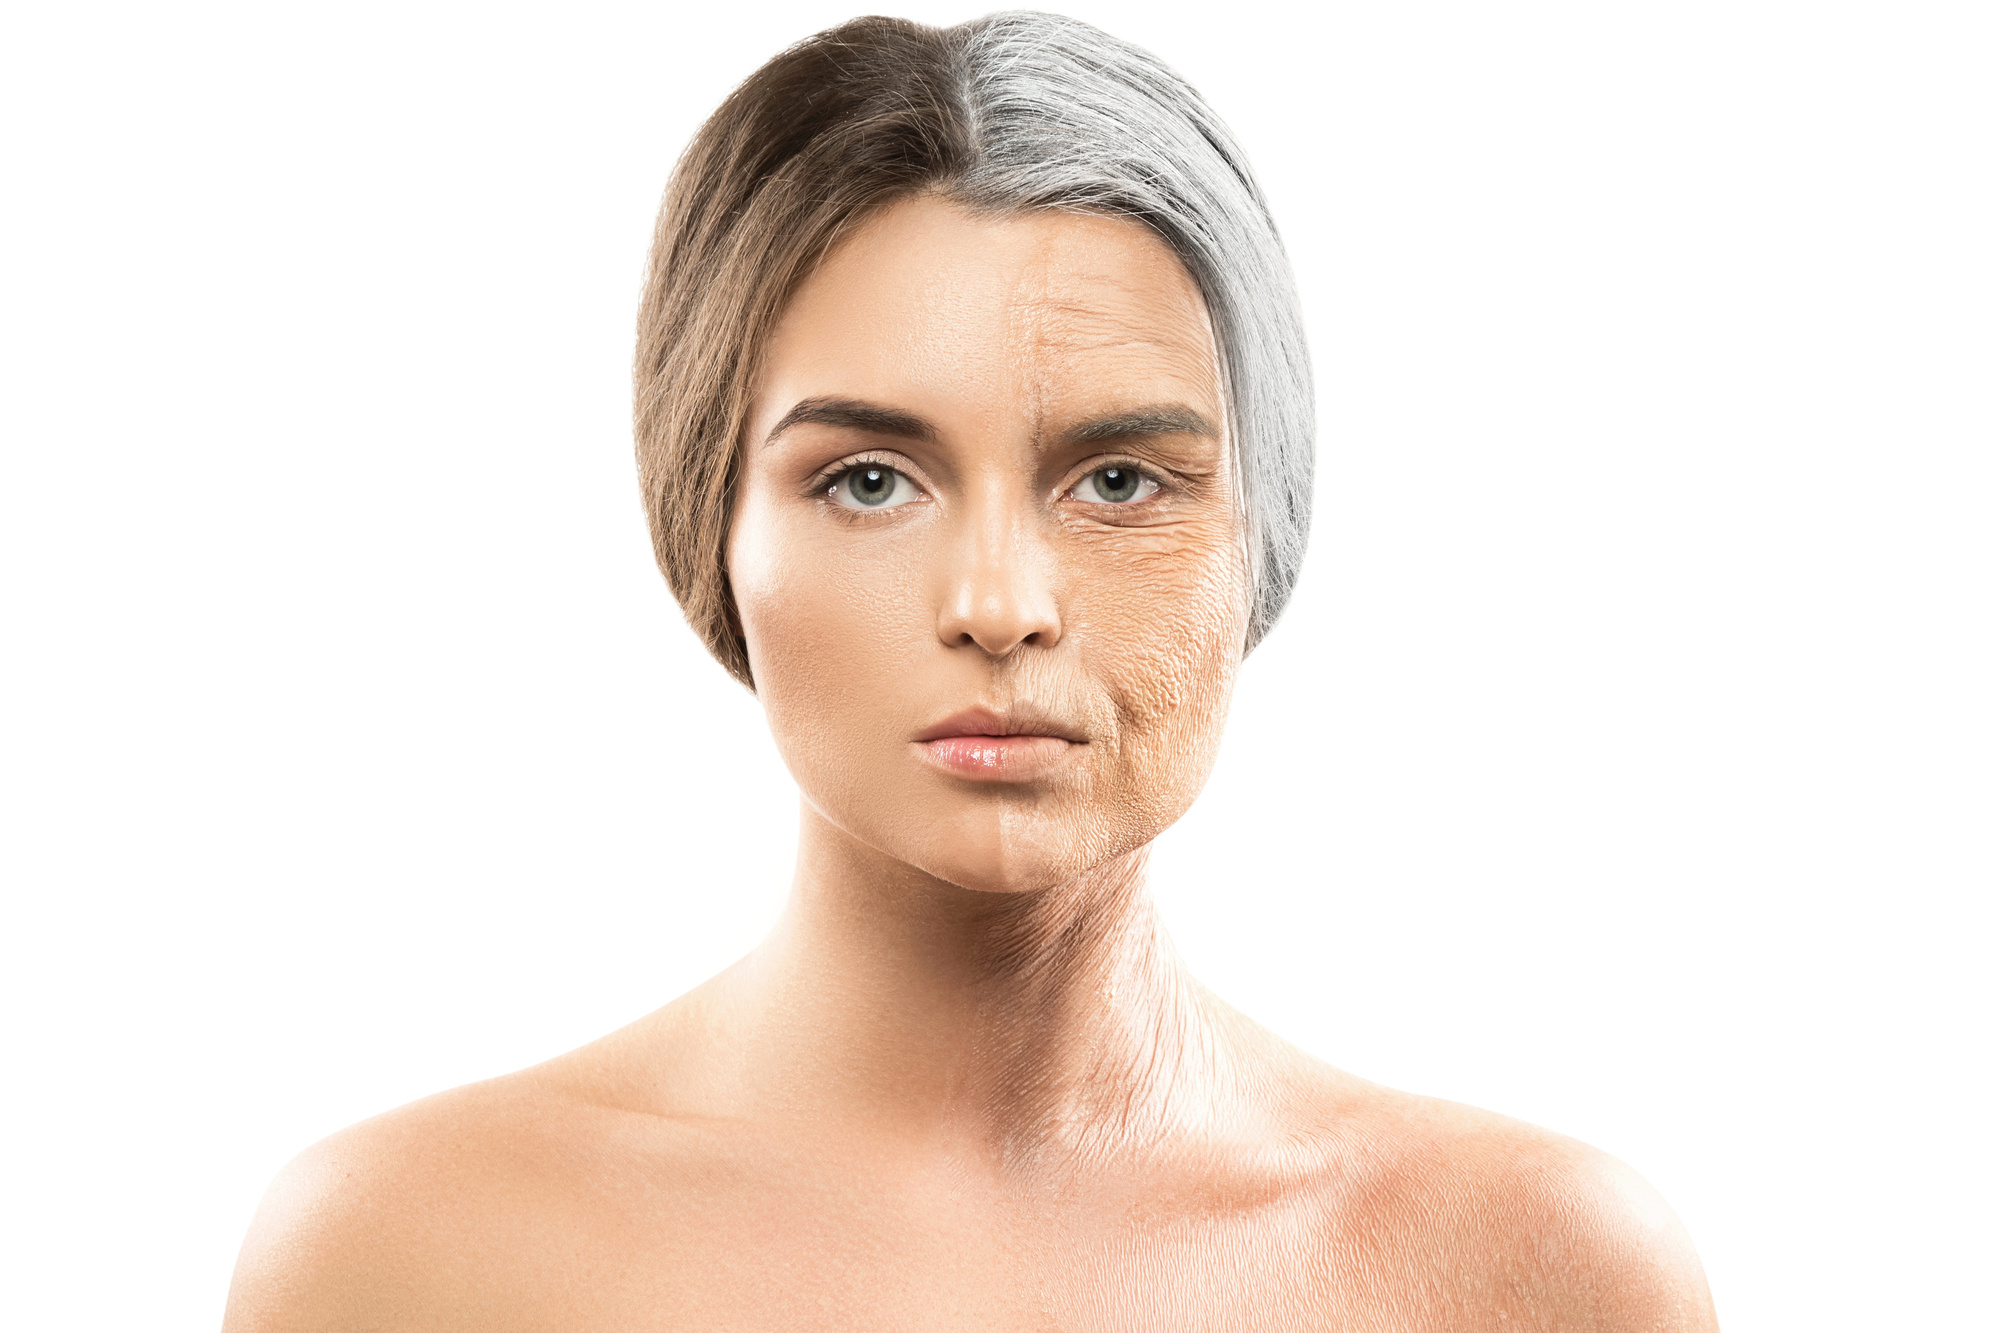 Anti-Aging Skin Care: Treatments, Products, and Routines